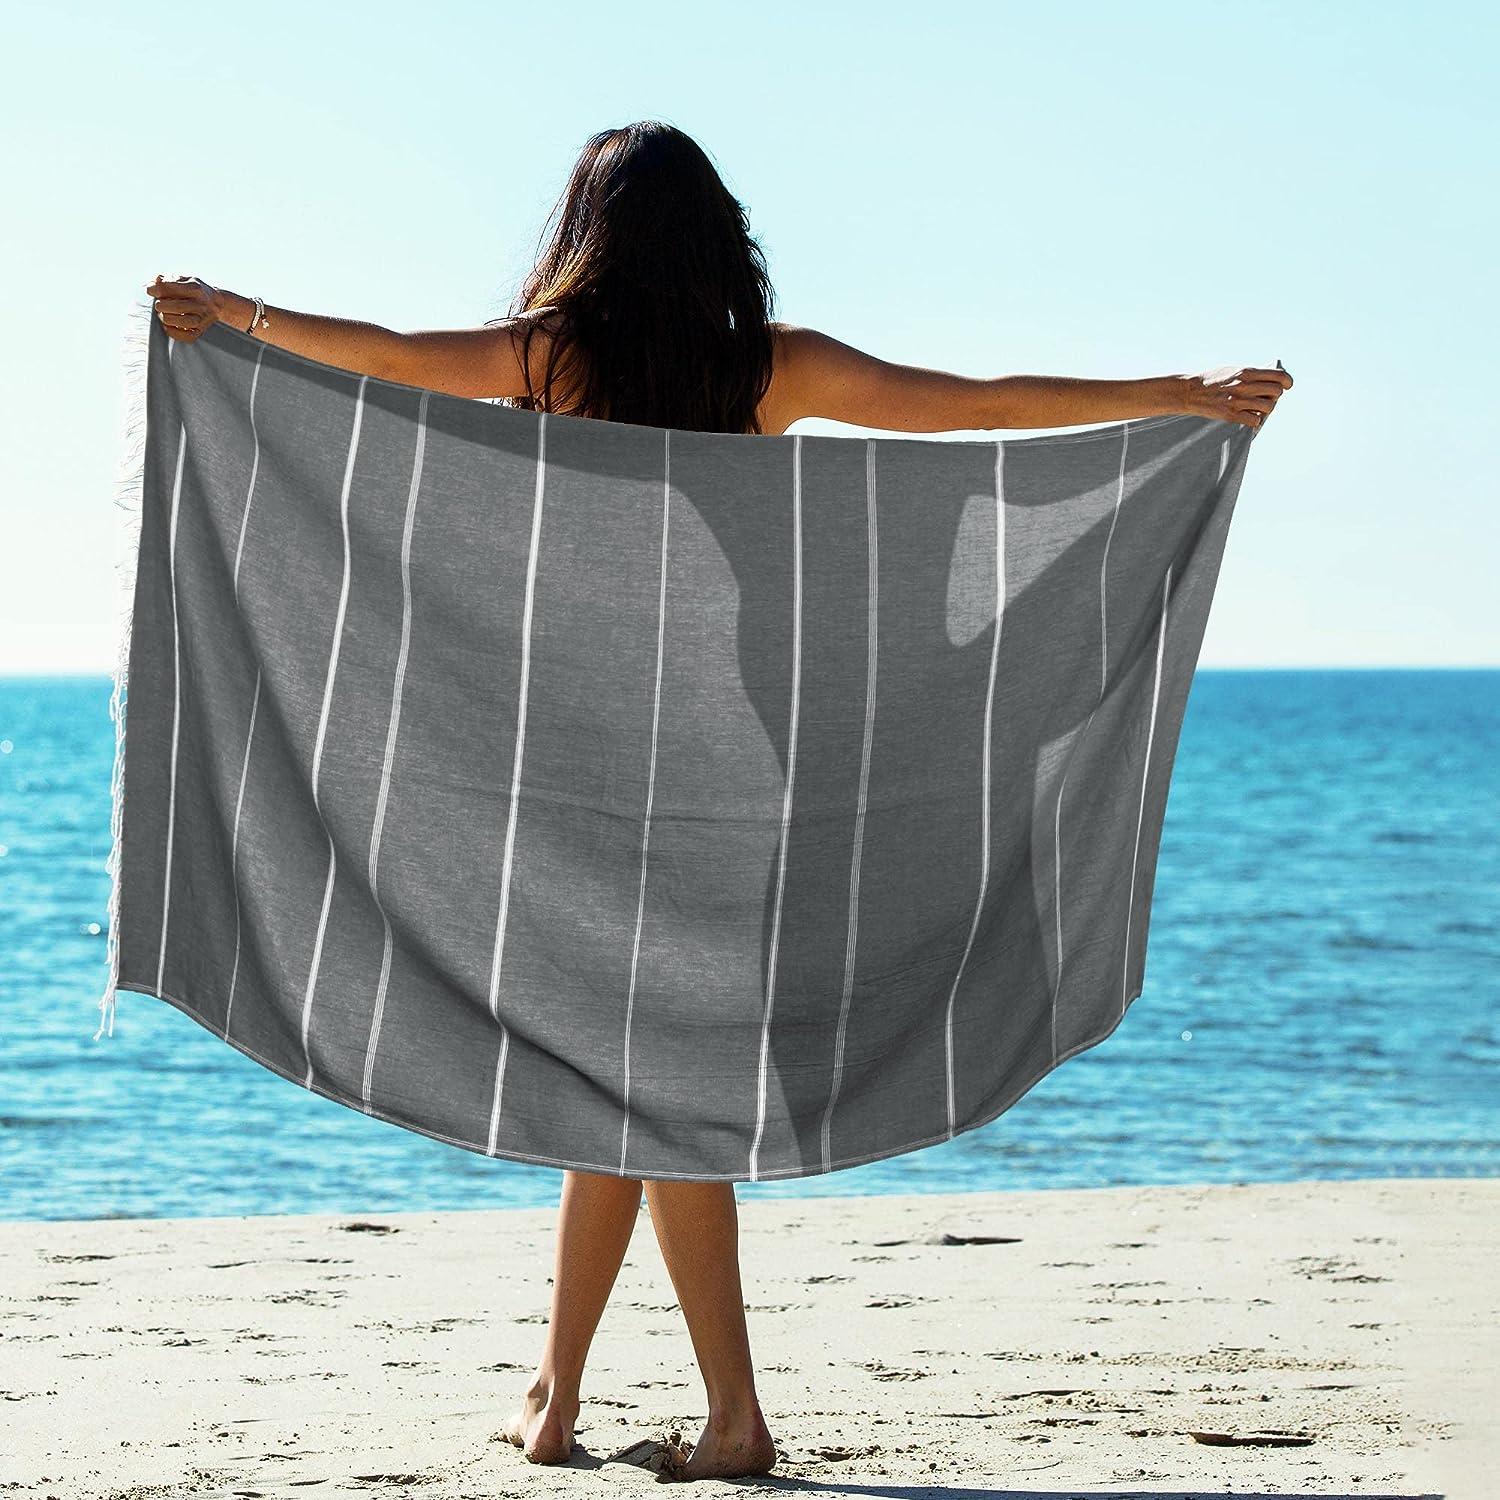 2 Packs Cotton Turkish Beach Towels Sandproof Sand Resistant Proof  Oversized Cute Extra Large Thin Lightweight Xl Big Adult Travel Essentials